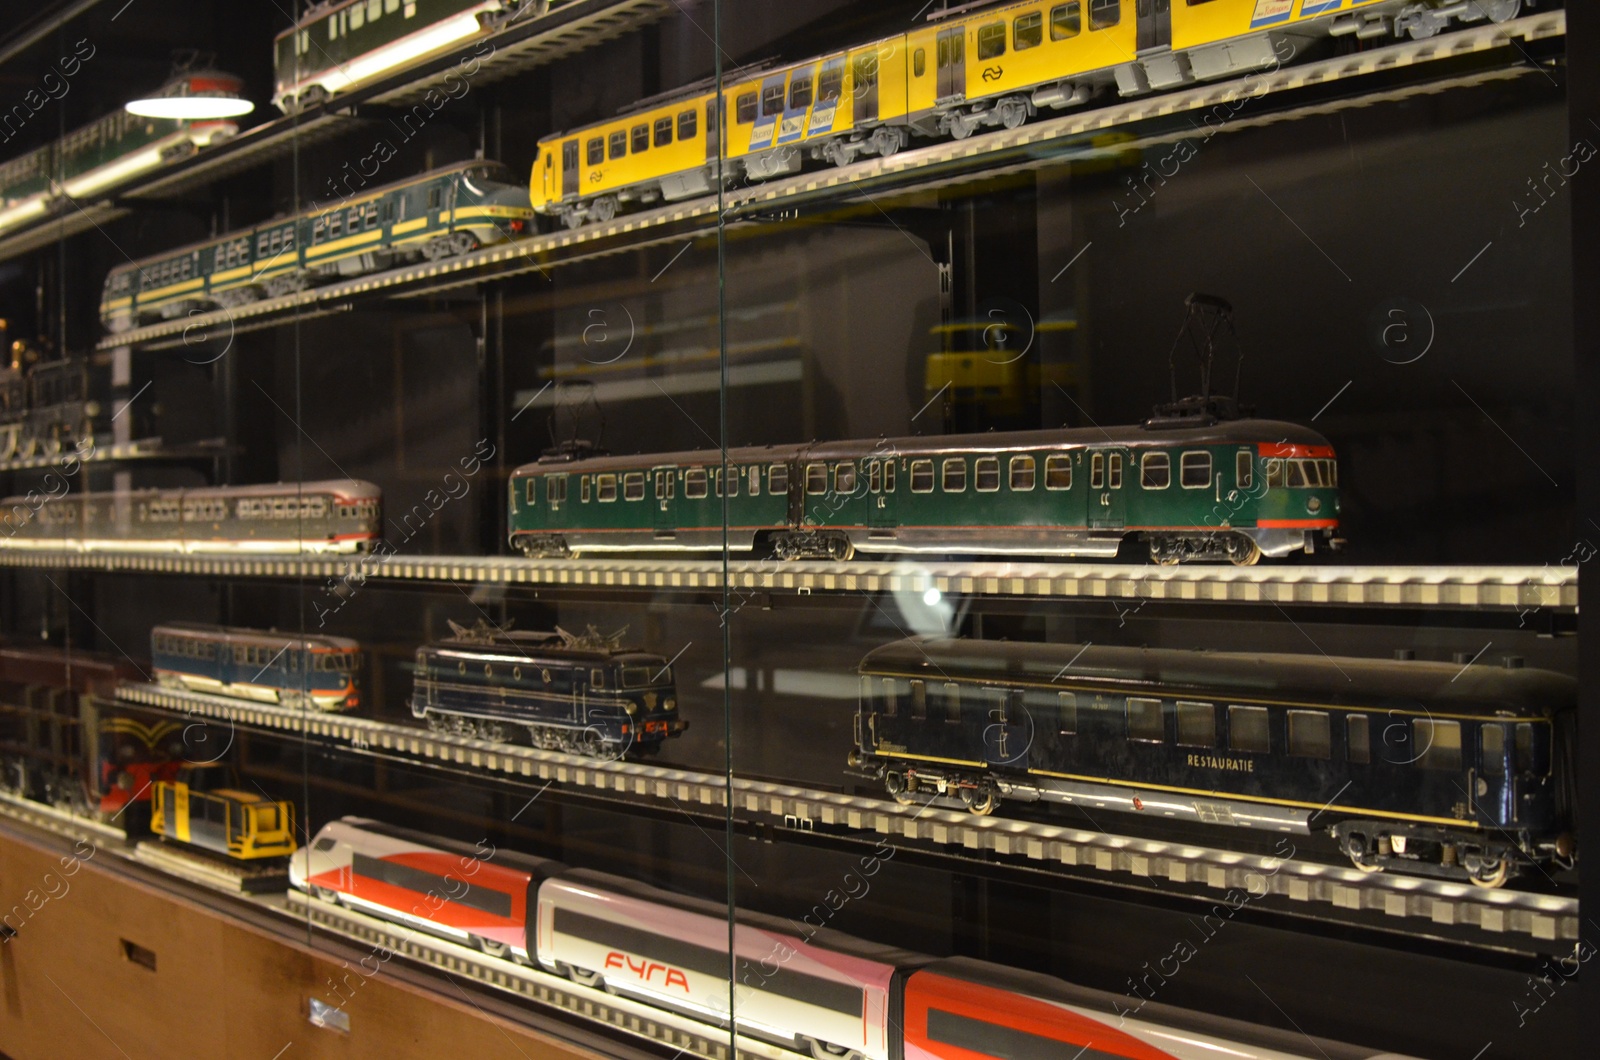 Photo of Utrecht, Netherlands - July 23, 2022: Models of different old trains on display in Spoorwegmuseum